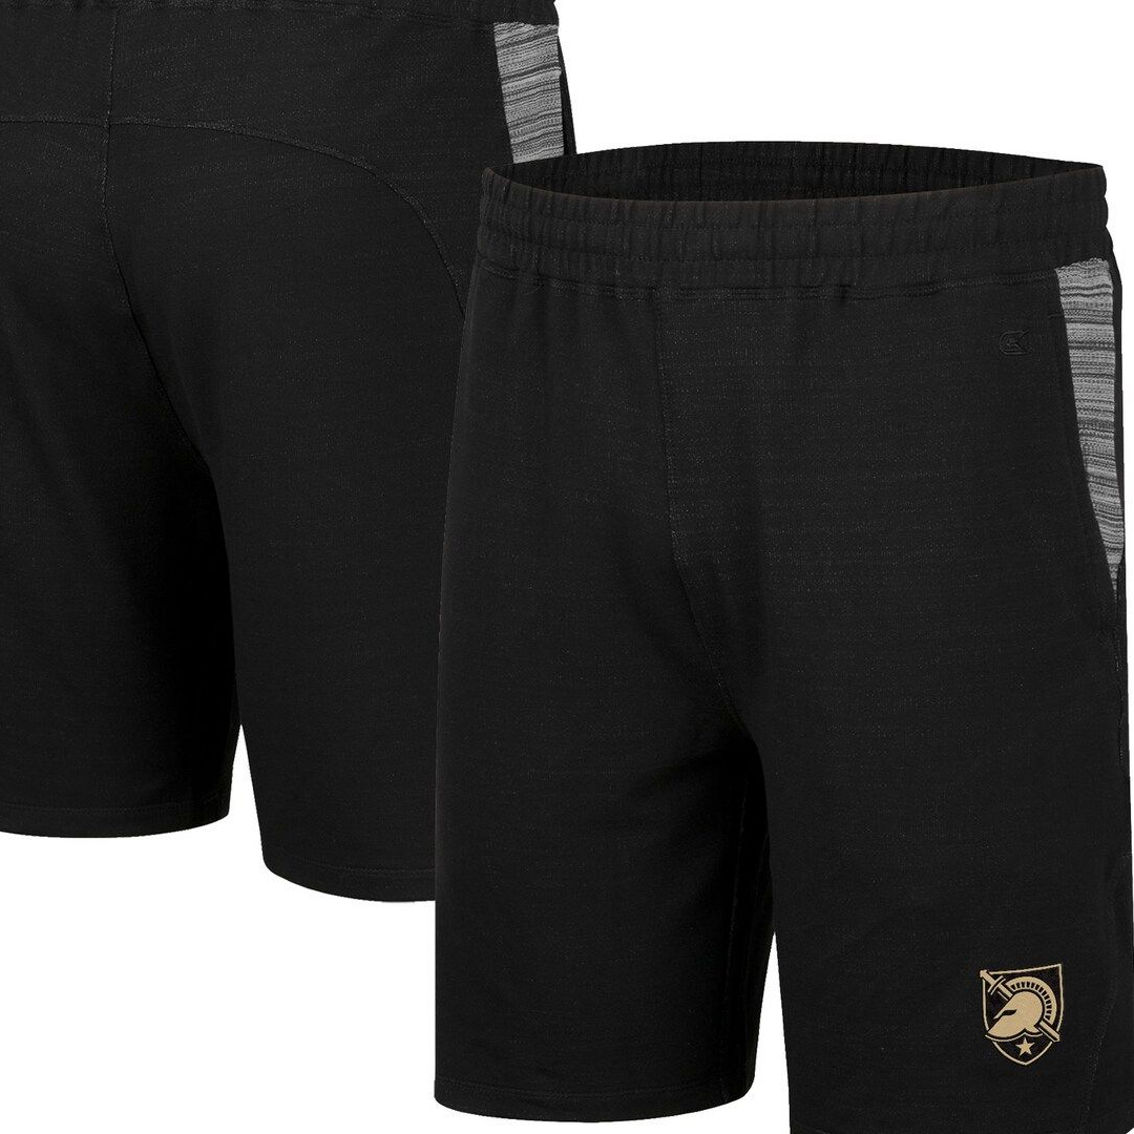 Colosseum Men's Black Army Black Knights Wild Party Shorts - Image 2 of 4